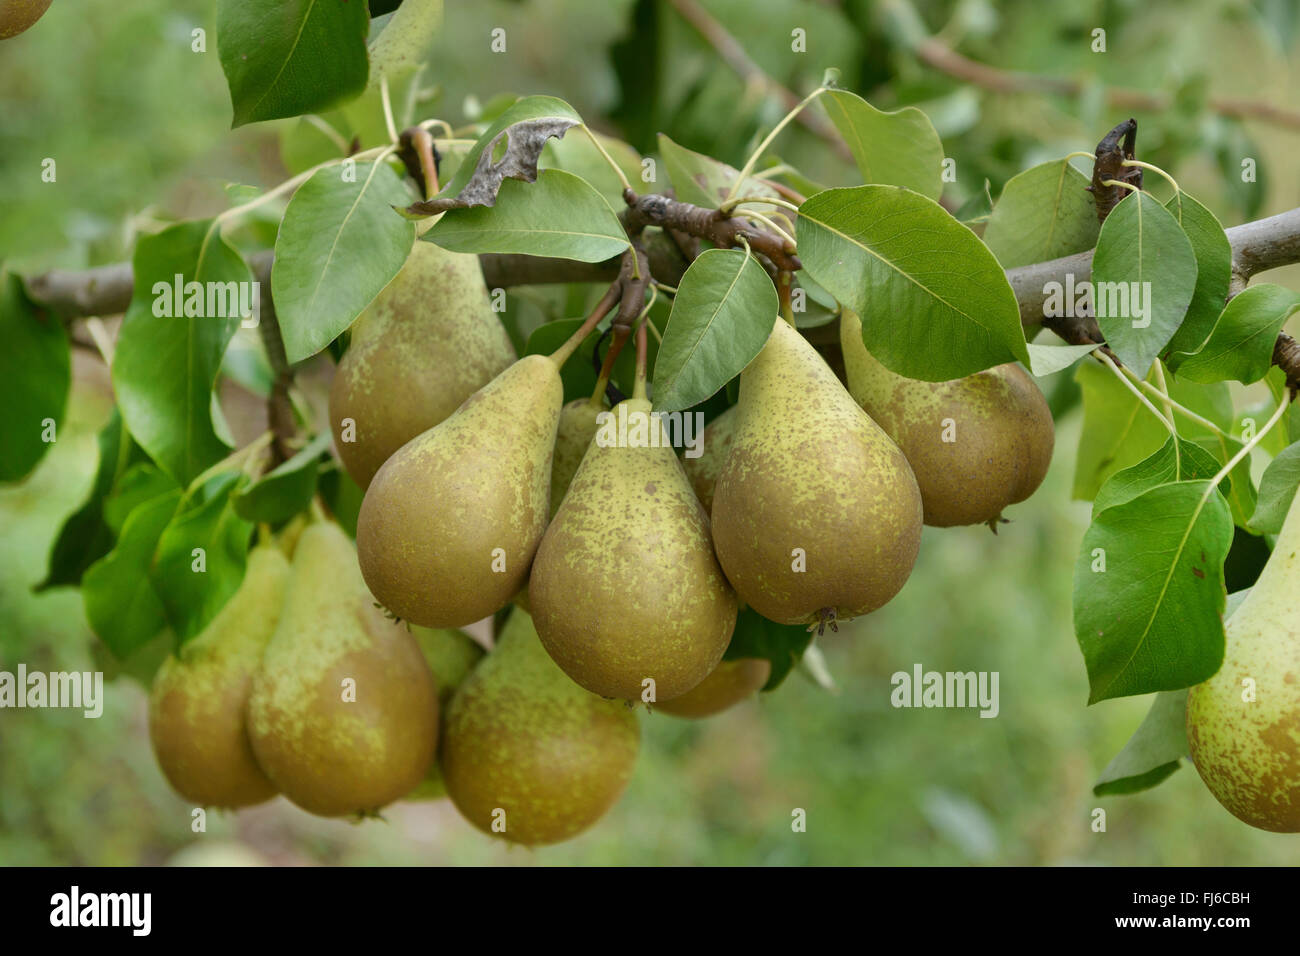 Common pear (Pyrus communis 'Conference', Pyrus communis Conference), pears on a tree, cultivar Conference, Germany Stock Photo